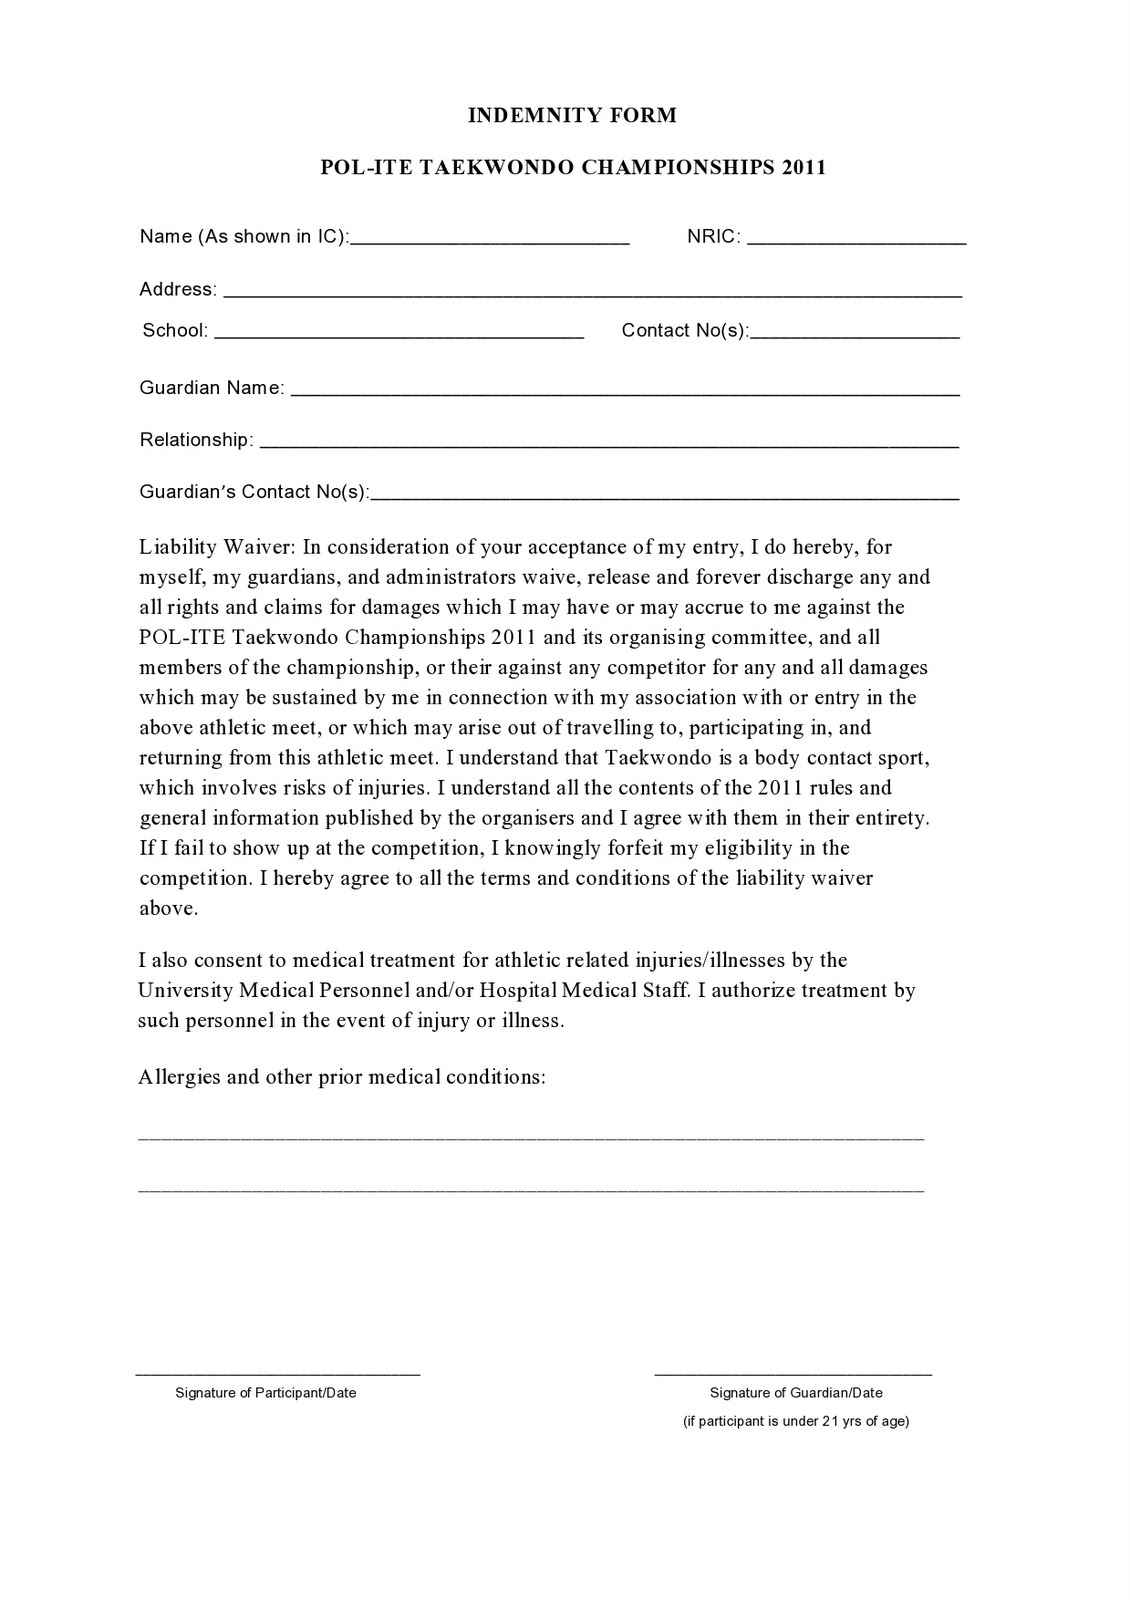 Indemnity Form Free Printable Documents 7269